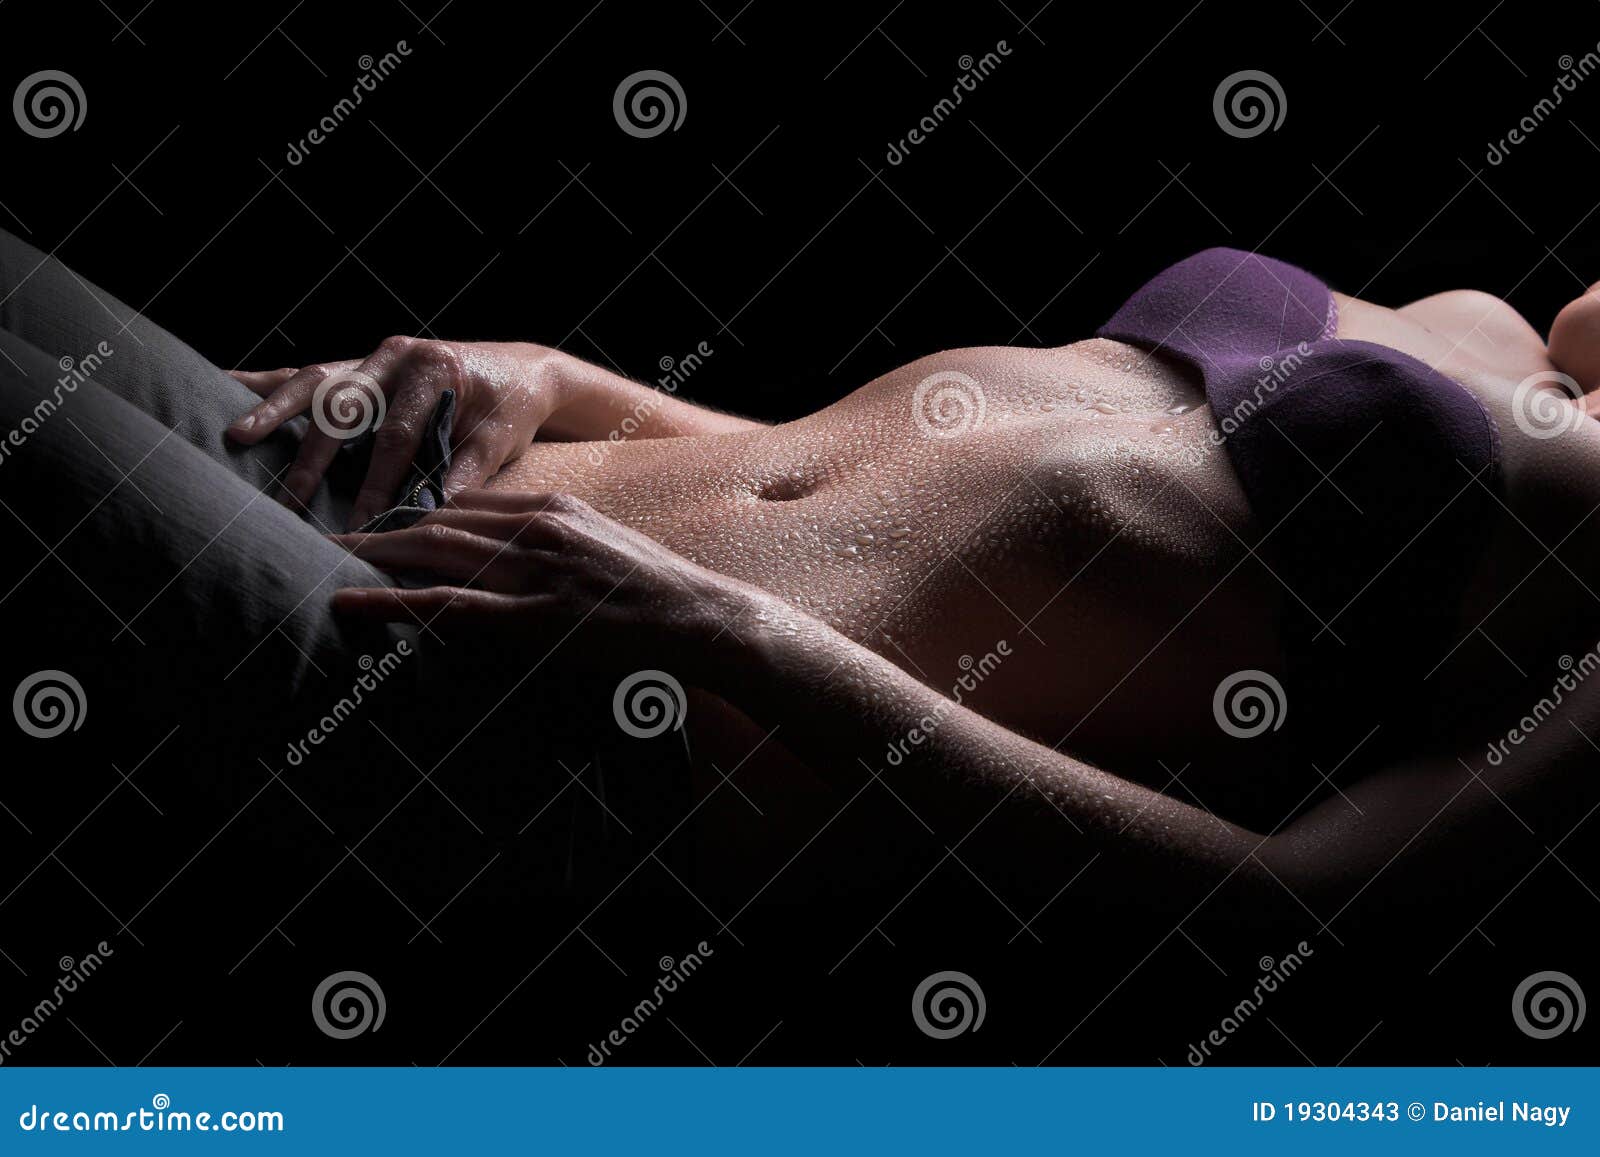 Woman Body, Water Drops on Belly Stock Image - Image of girl, ladylike:  19304343